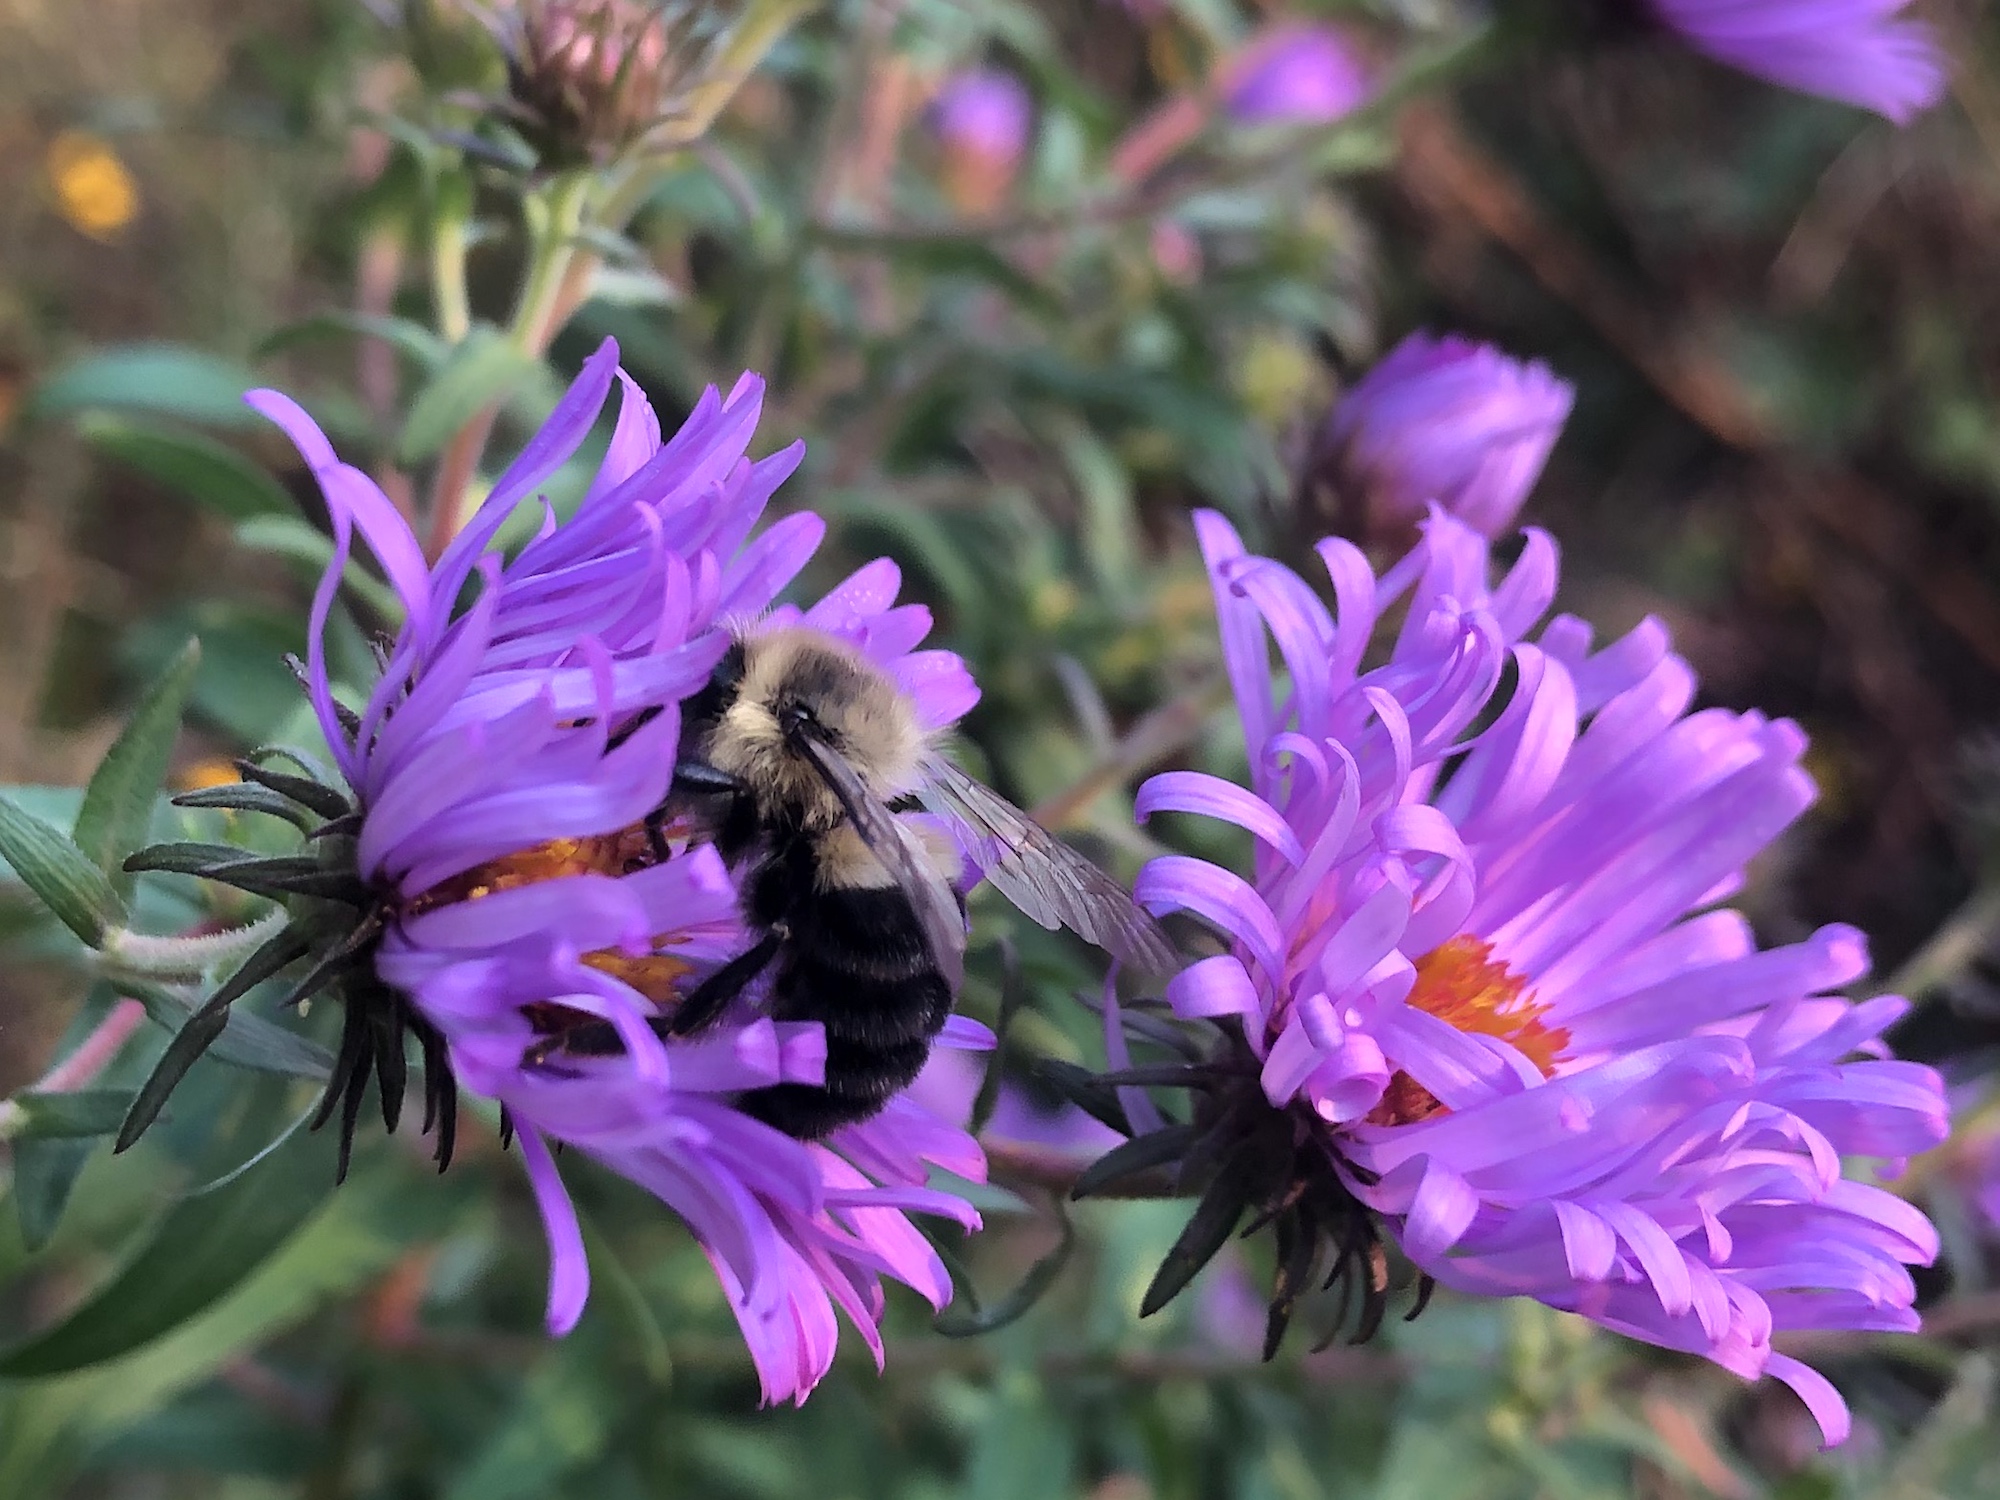 Bumblebee on Aster on September 16, 2020.